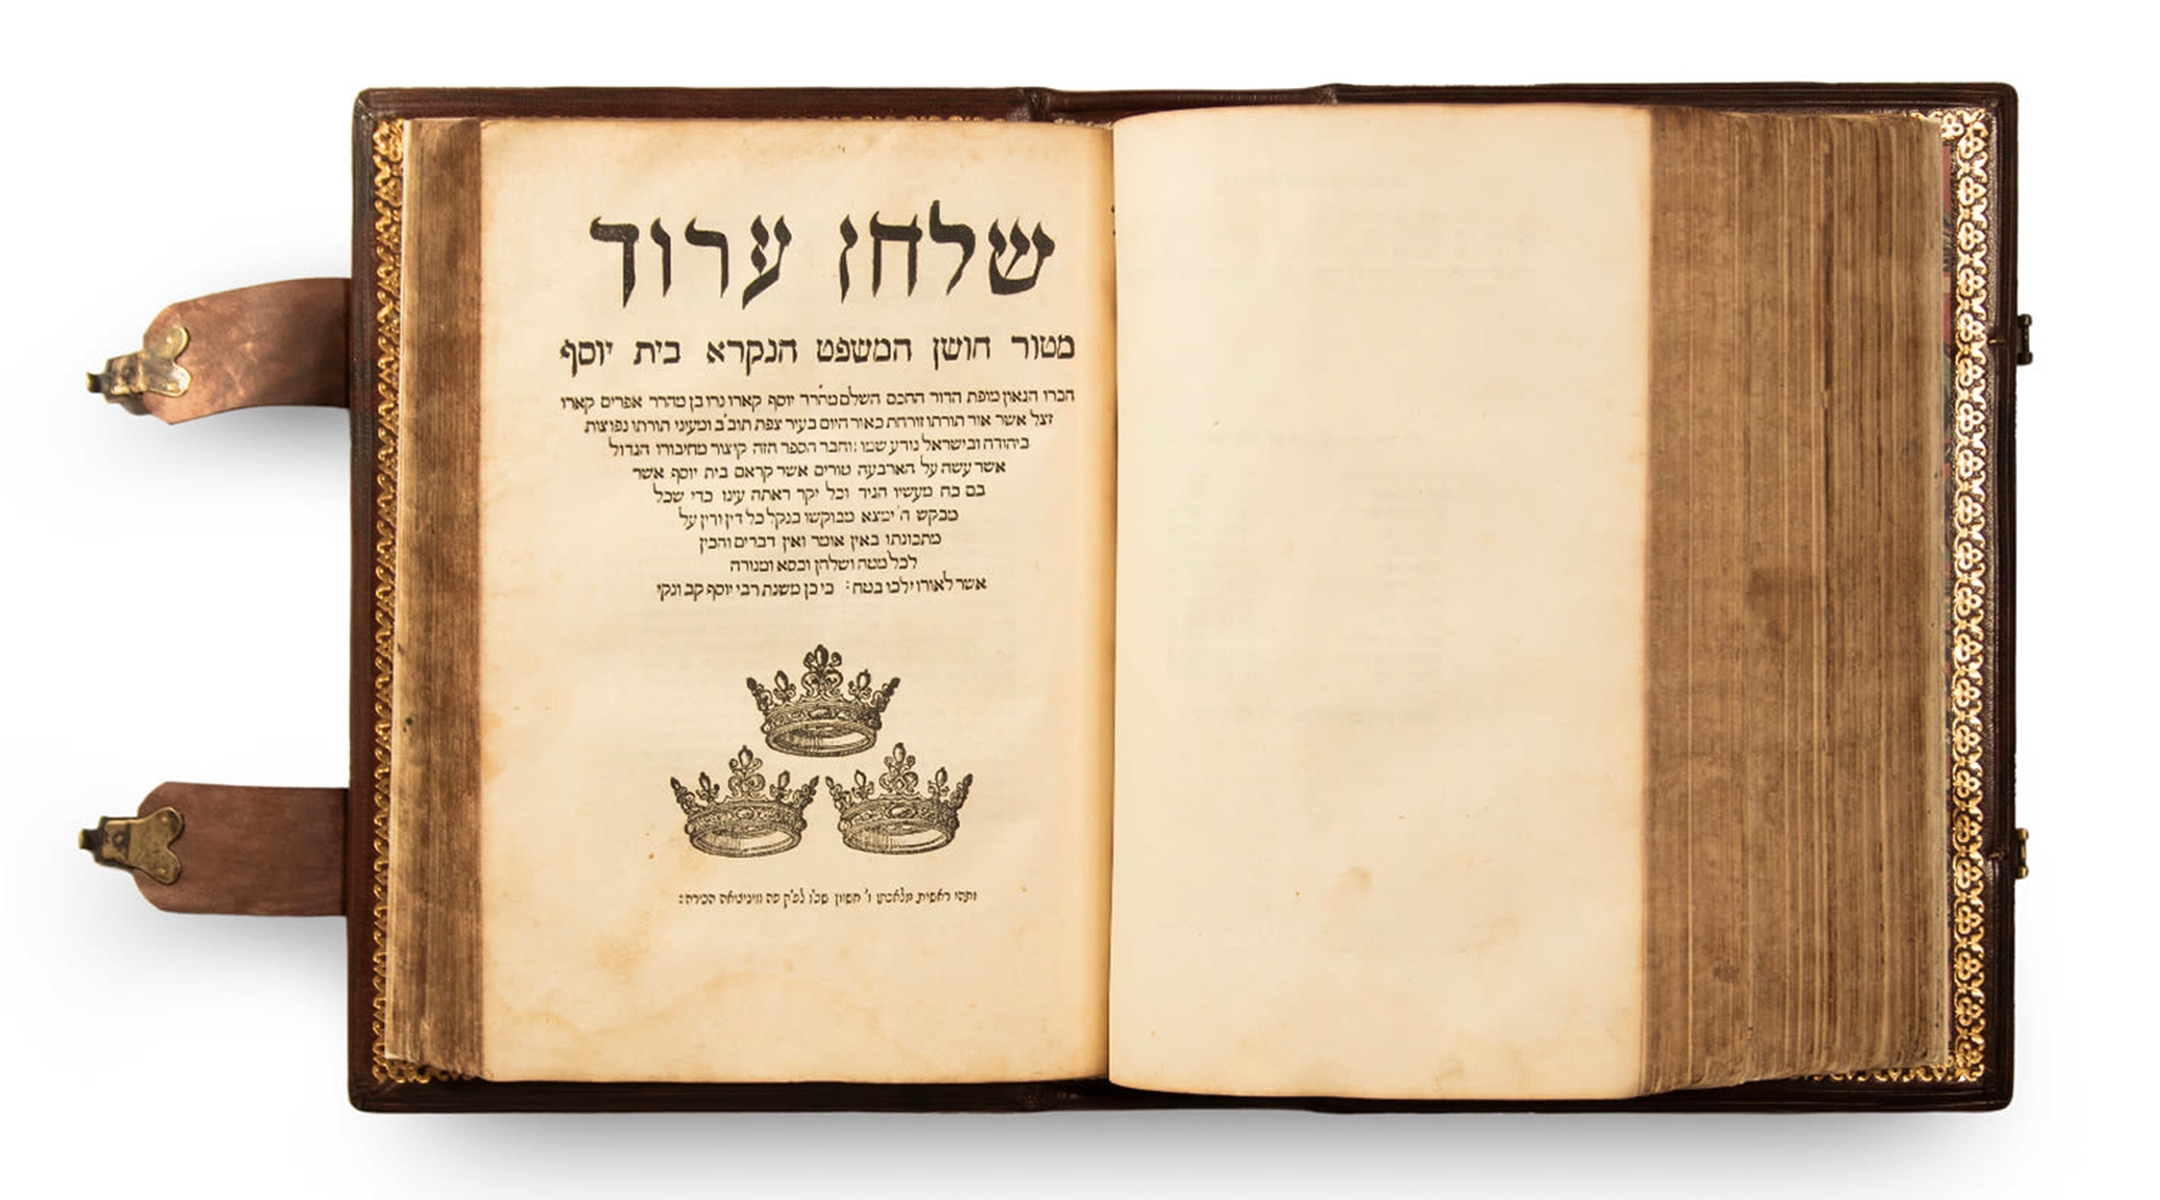 A page from a 16th-century first-edition Shulchan Aruch, a book of Jewish law, which fetched $620,000 at a Genazym auction. (Courtesy of Genazym).